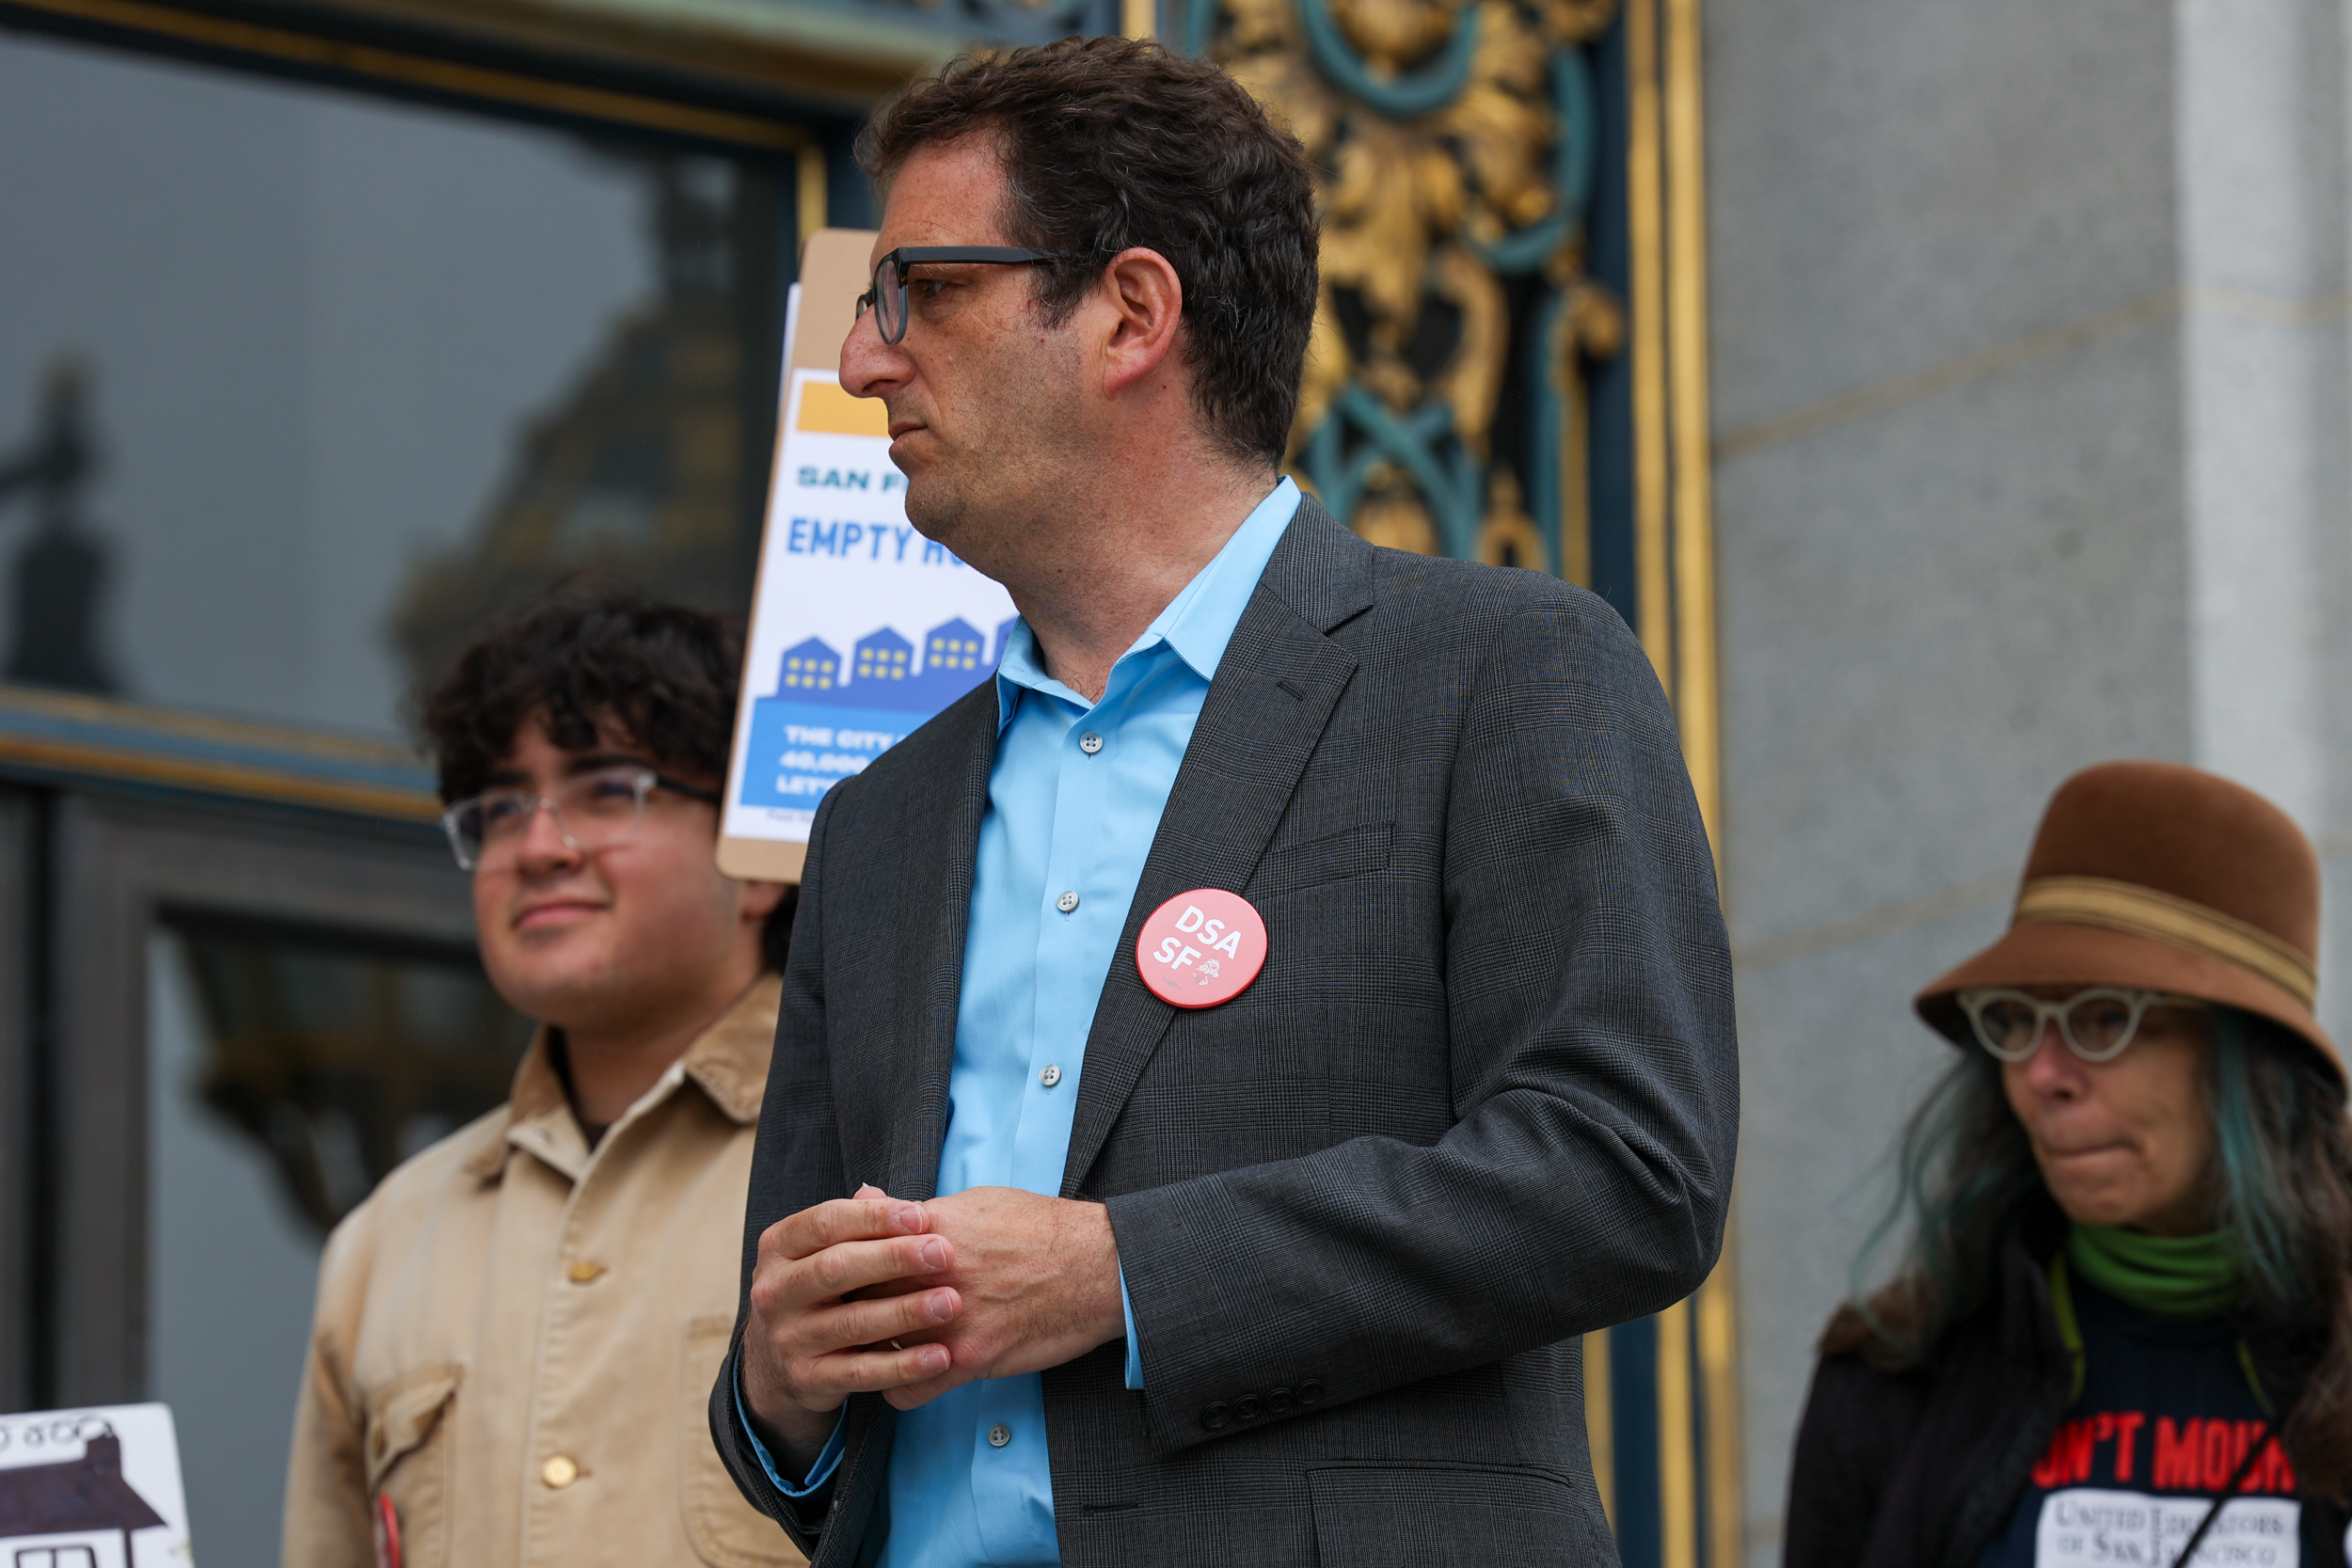 Dean Preston stands in profile with his hands clasped. He is wearing a blue dress shit and gray jacket and standing in front of a younger Latinx person holding a protest sign.